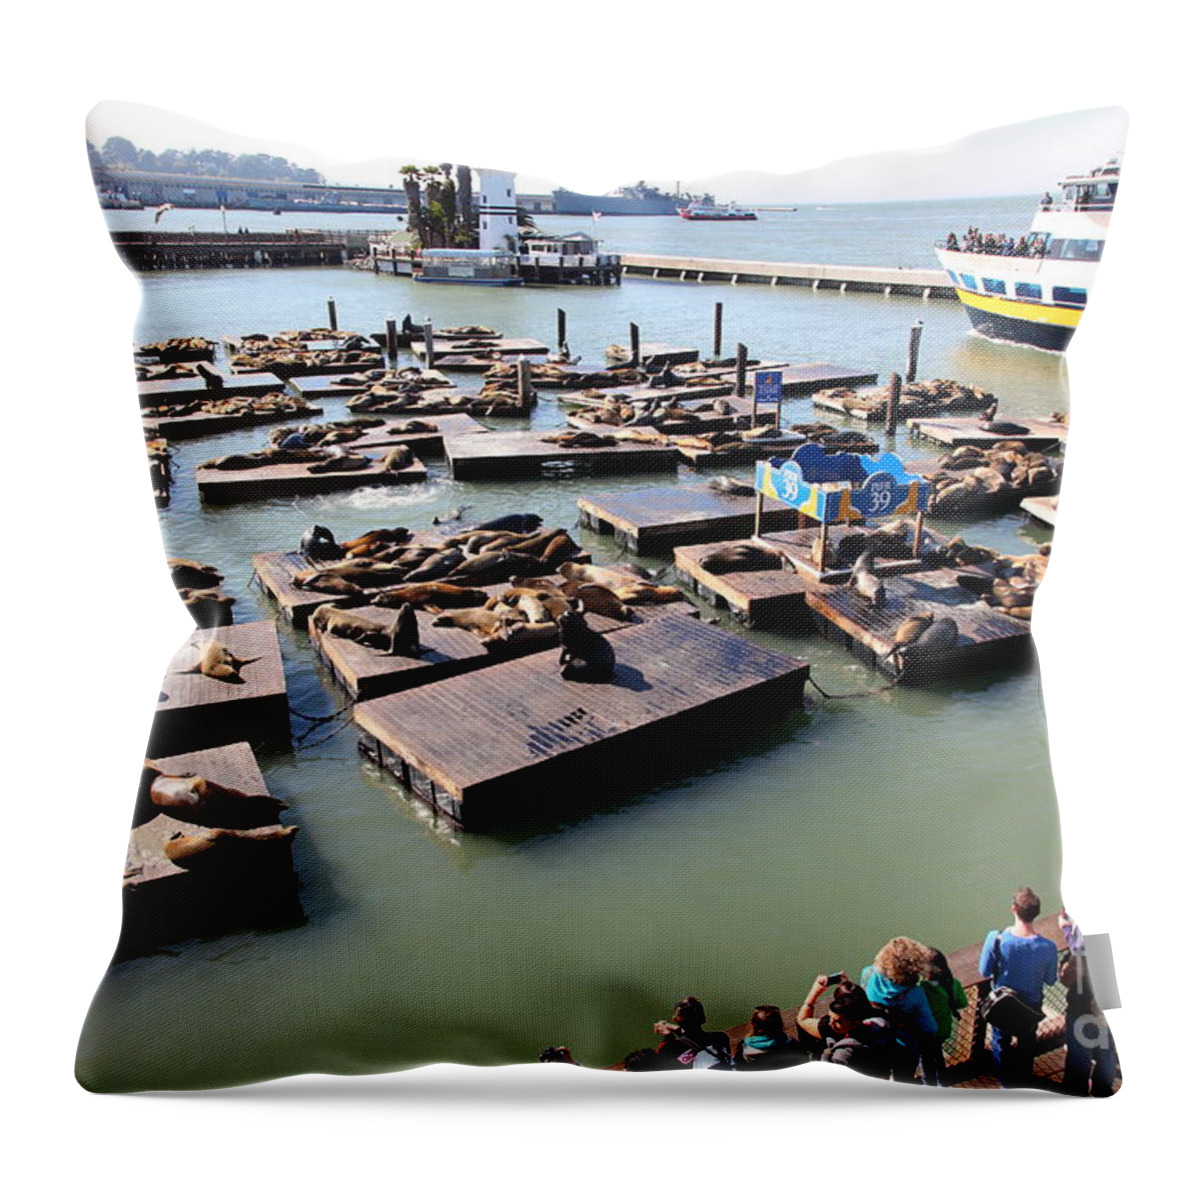 San Francisco Throw Pillow featuring the photograph San Francisco Pier 39 Sea Lions 5D26116 by Wingsdomain Art and Photography